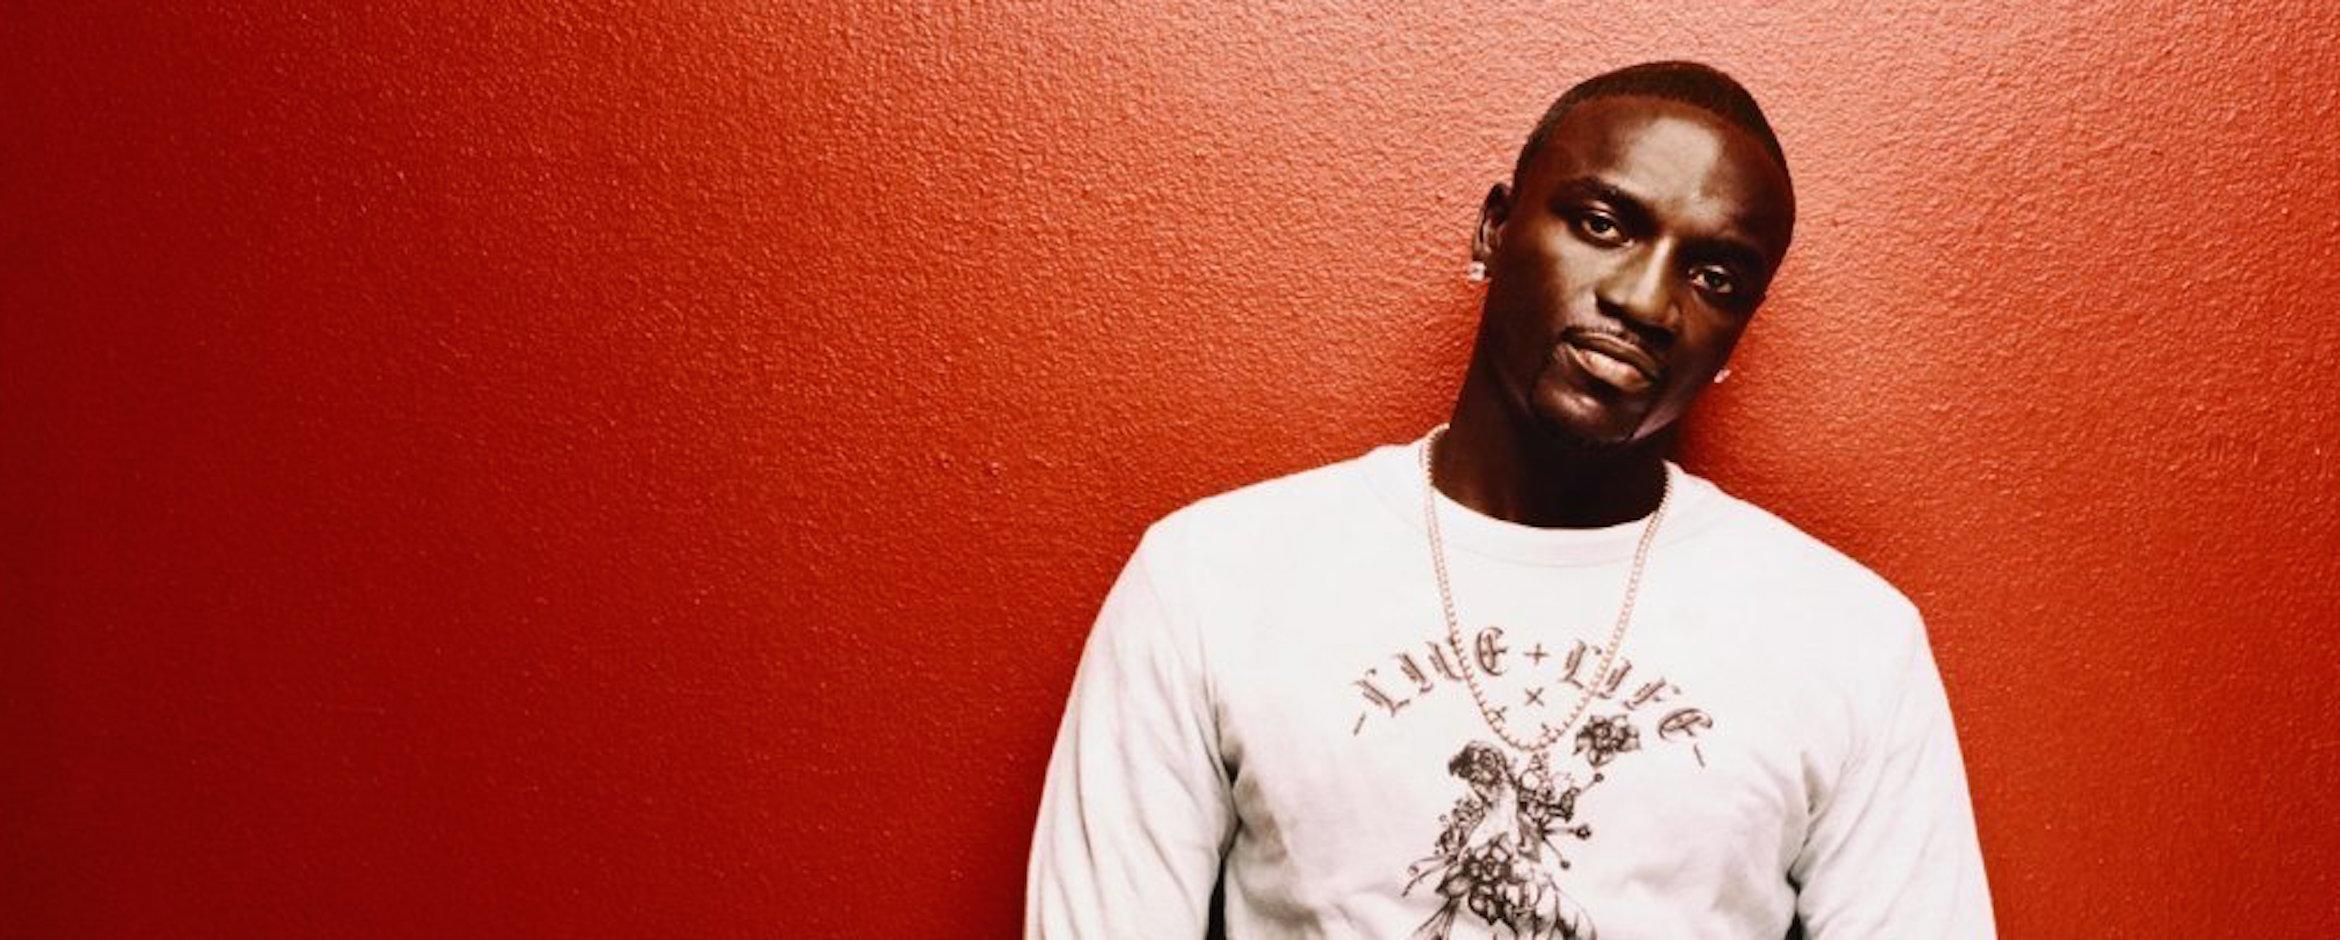 Akon Wallpaper High Resolution and Quality Download